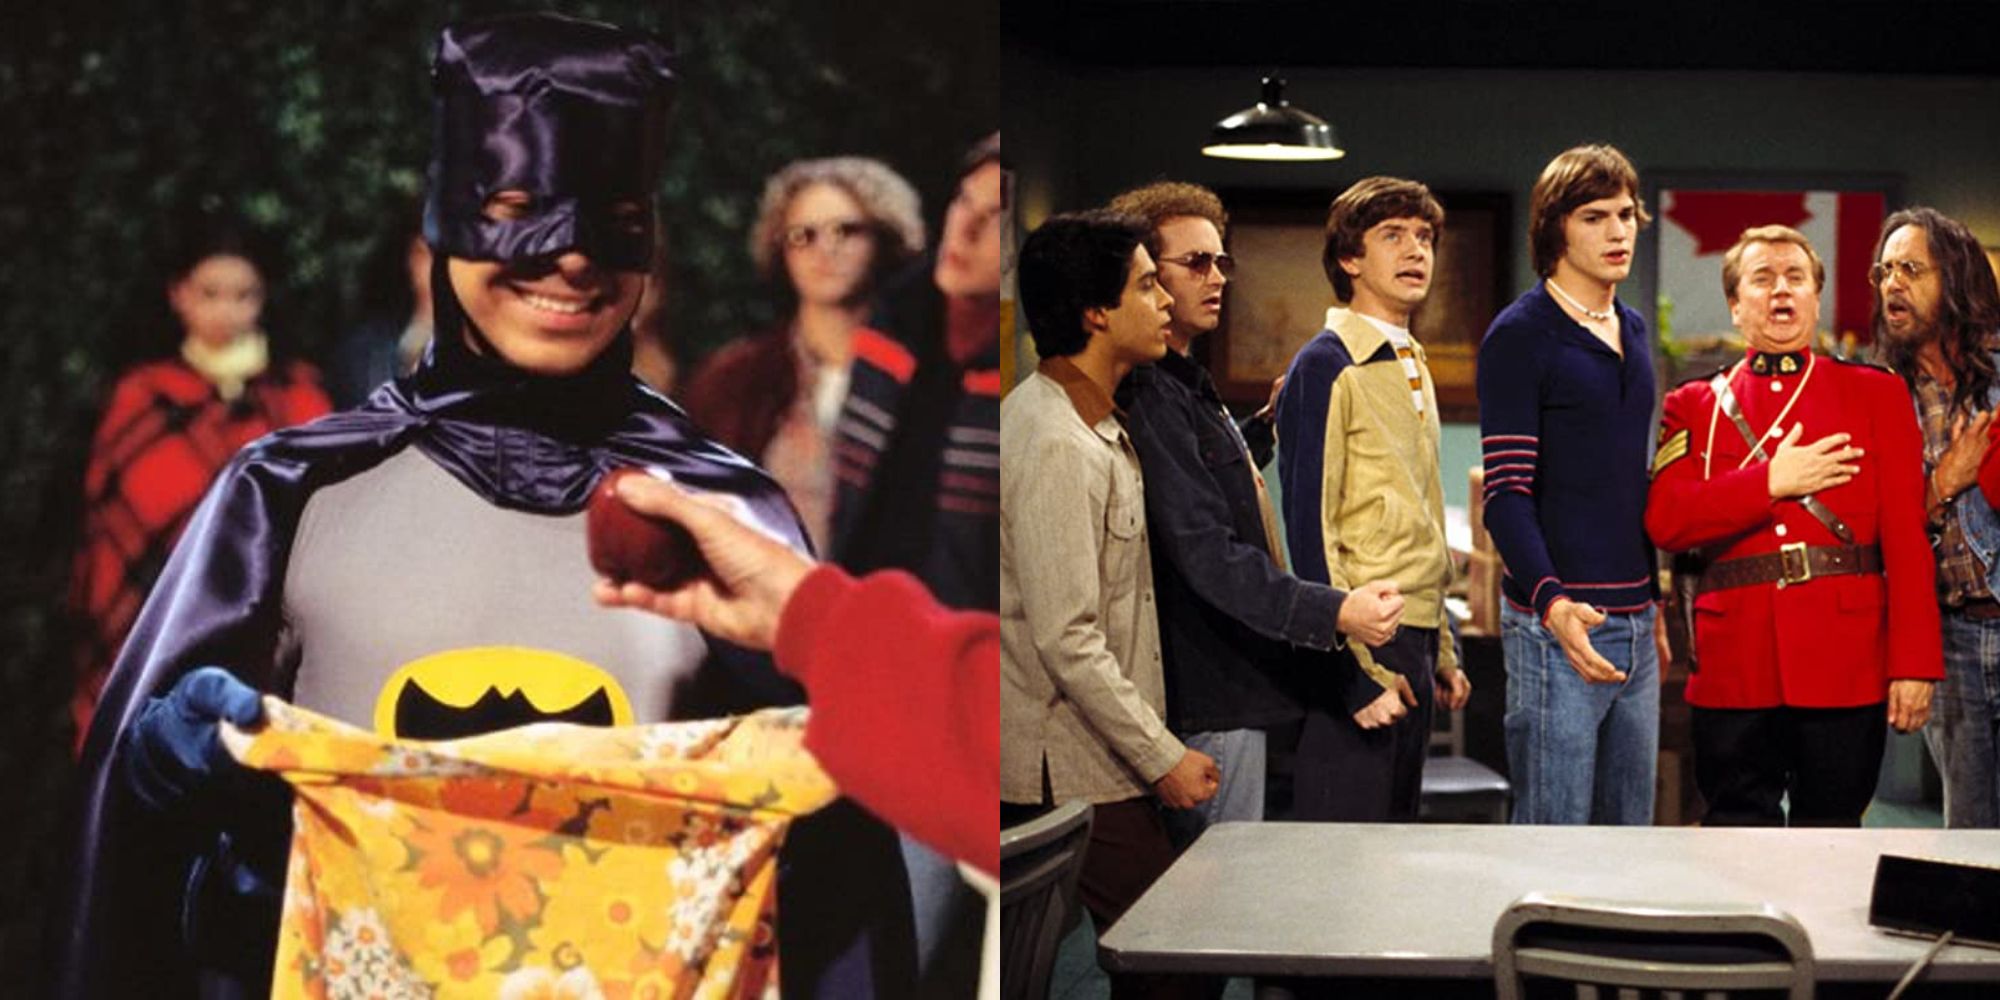 Split image showing Fez in a costume and the cast of That '70s Show with a Canadian officer.